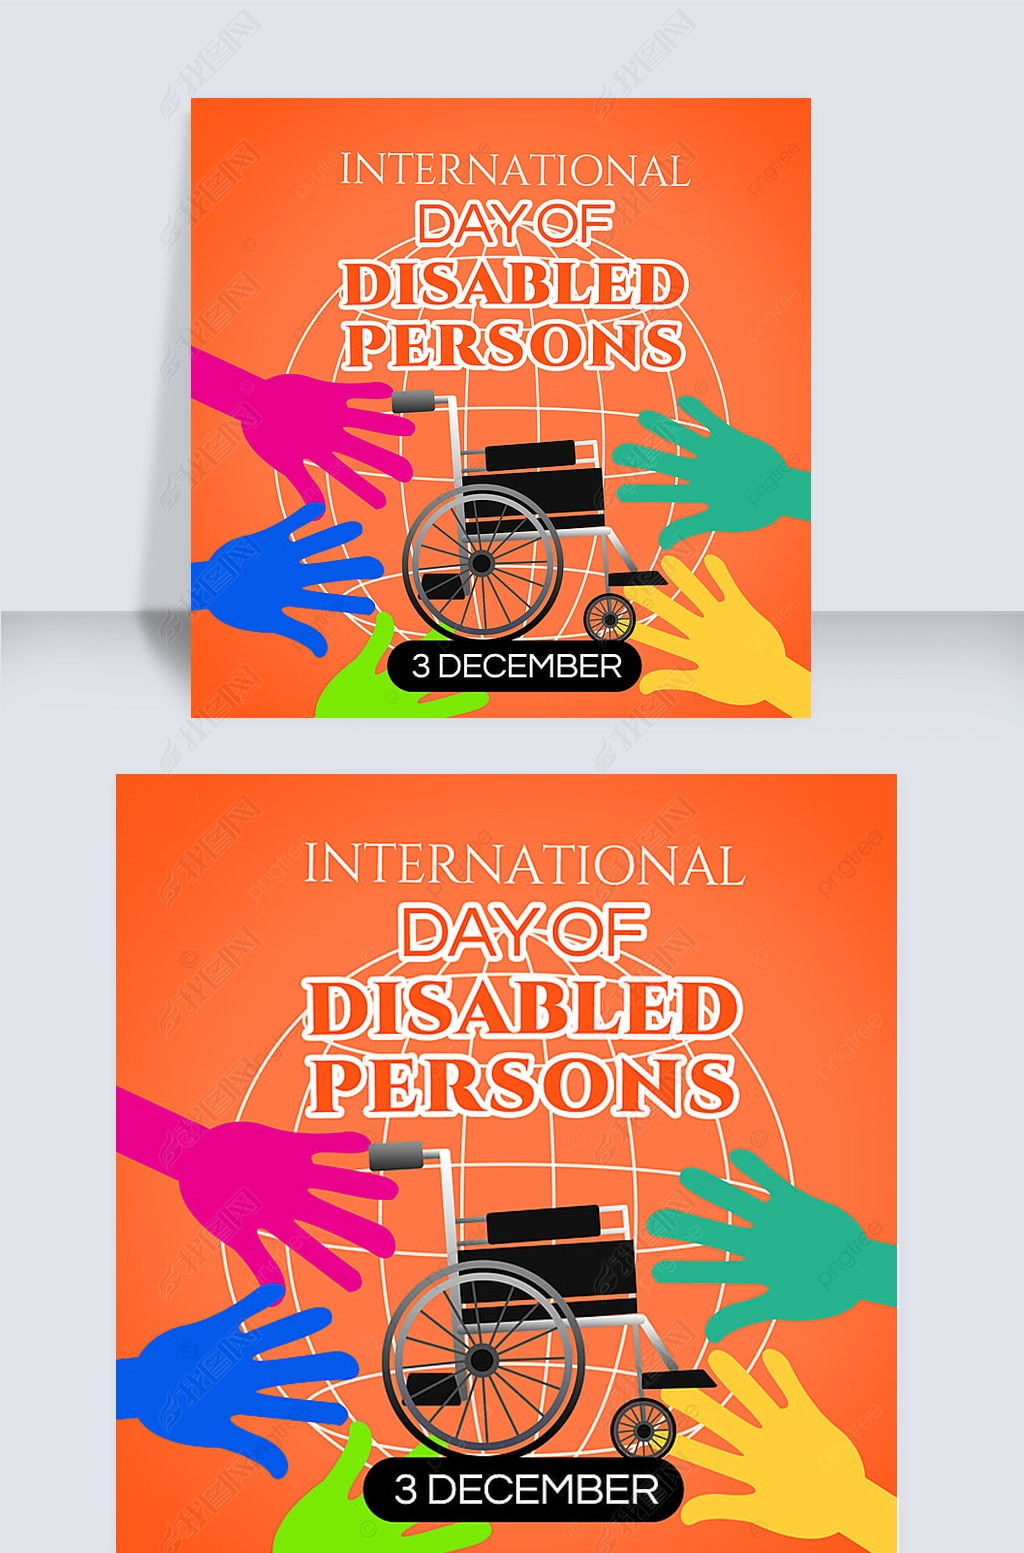 international day of disabled persons罻snsģ